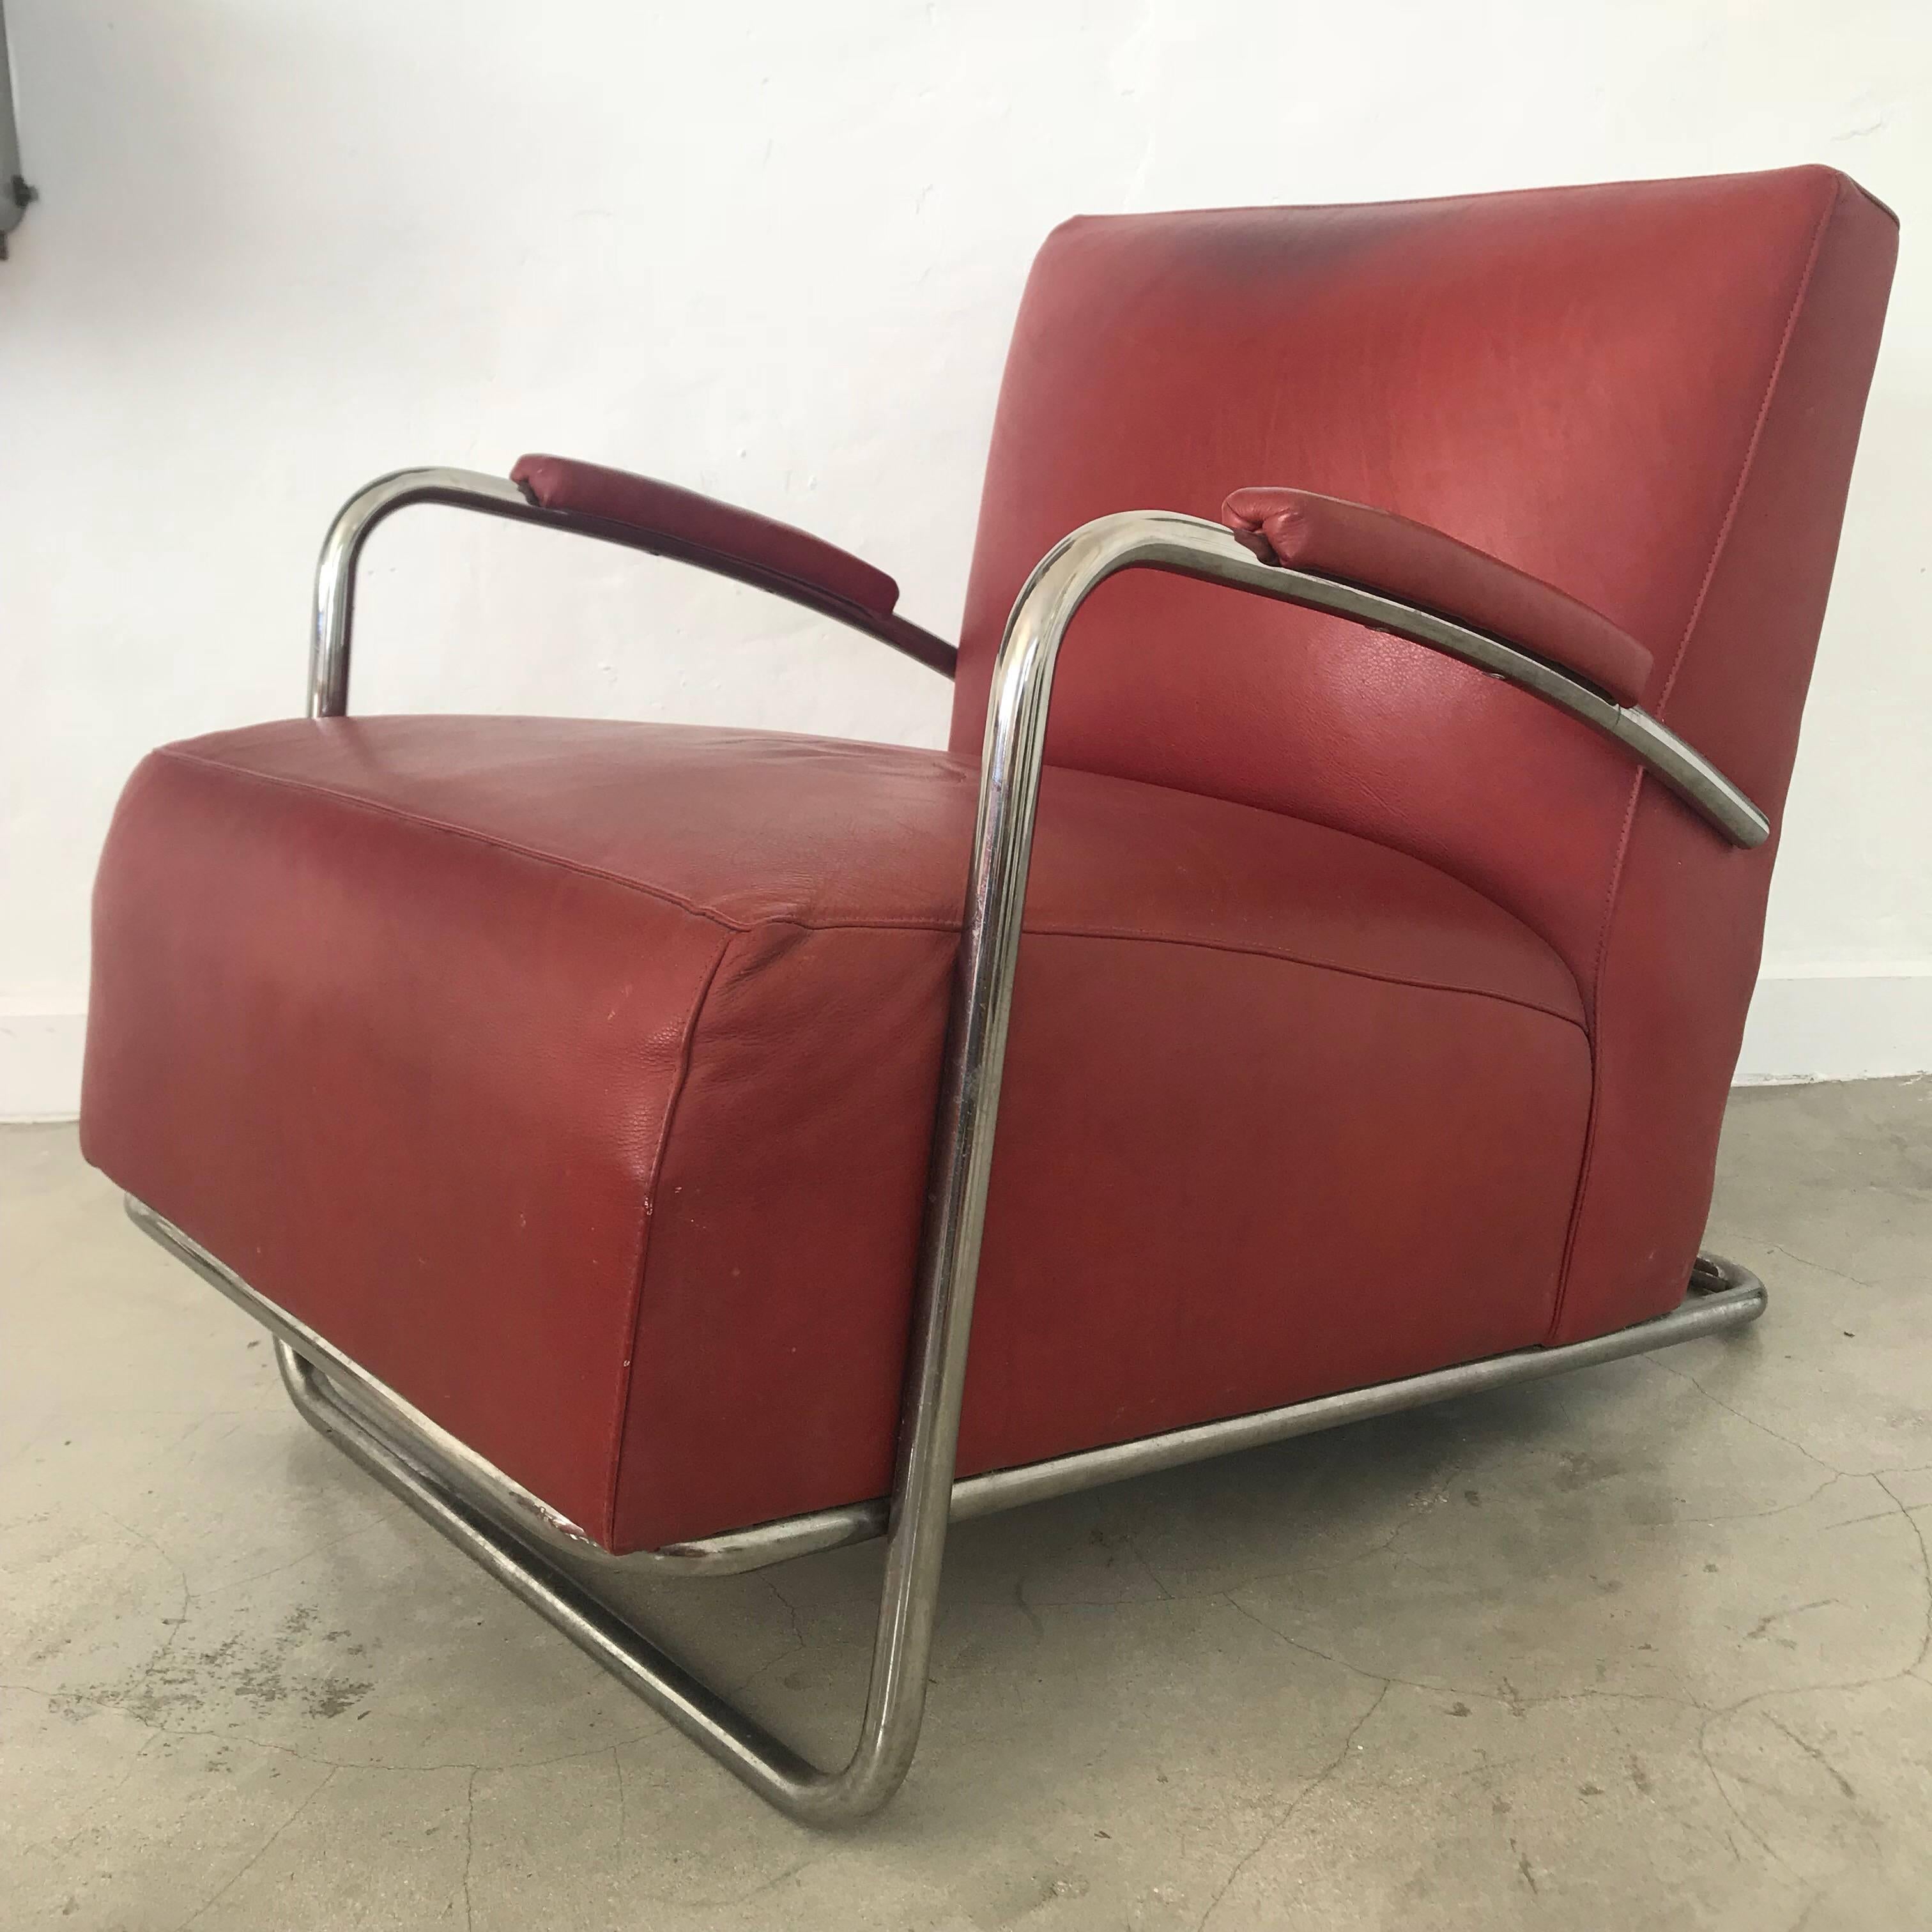 Red leather and tubular chrome chair.